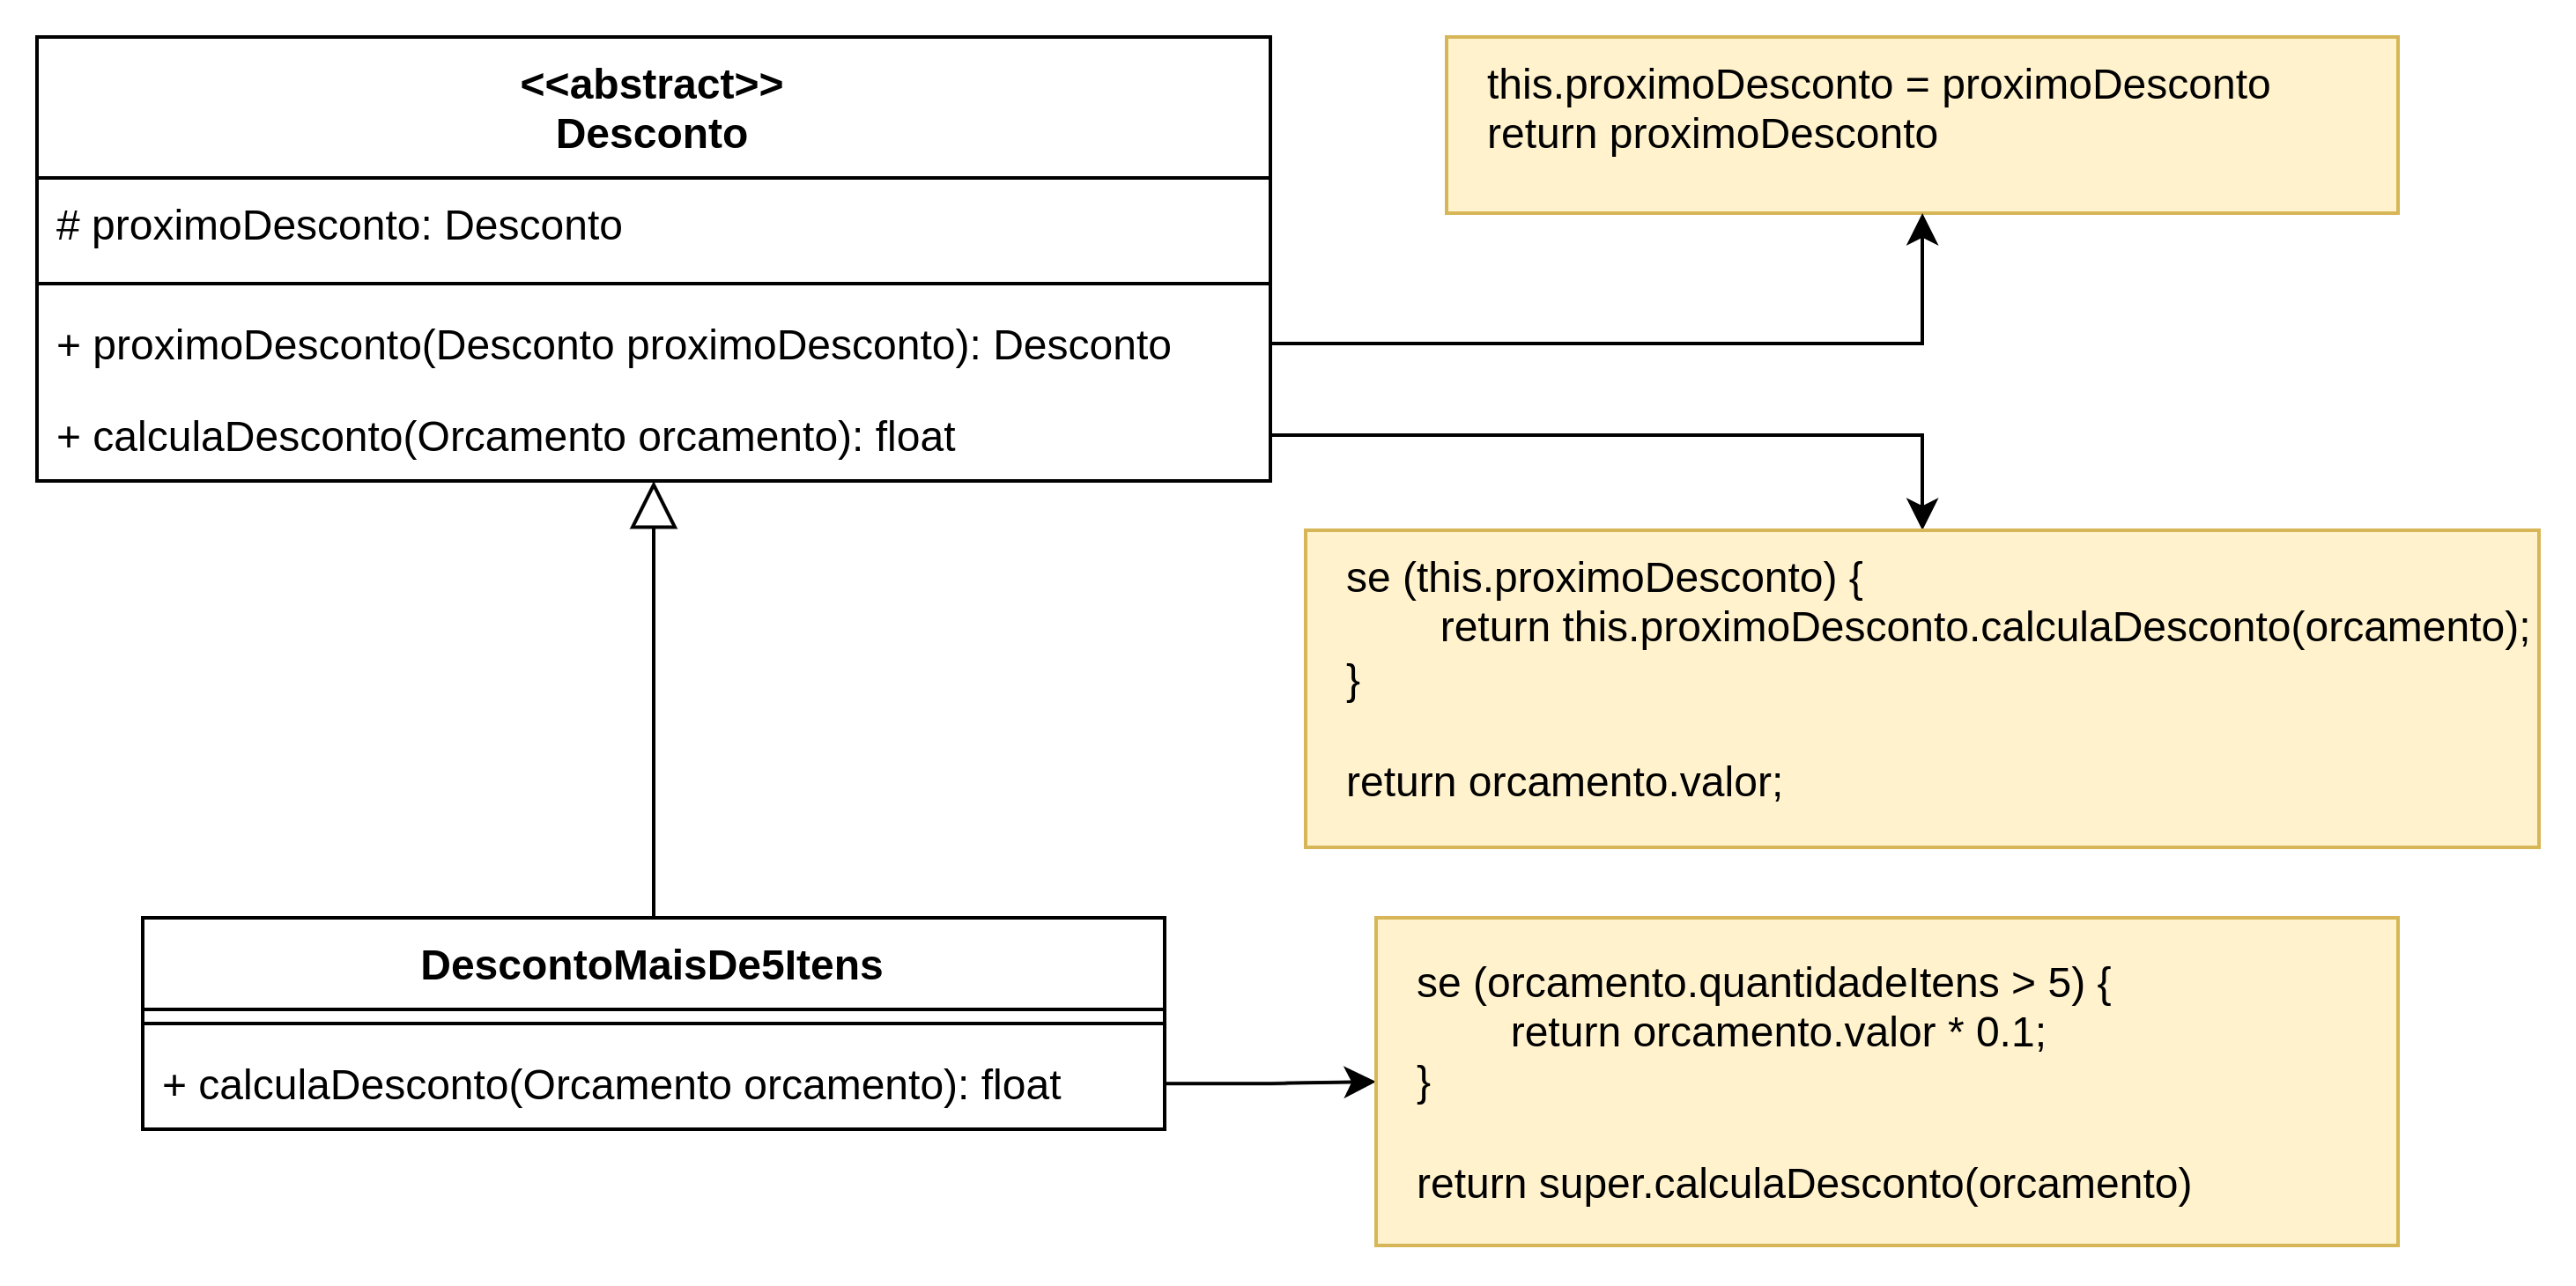 Chain of Responsability Pattern